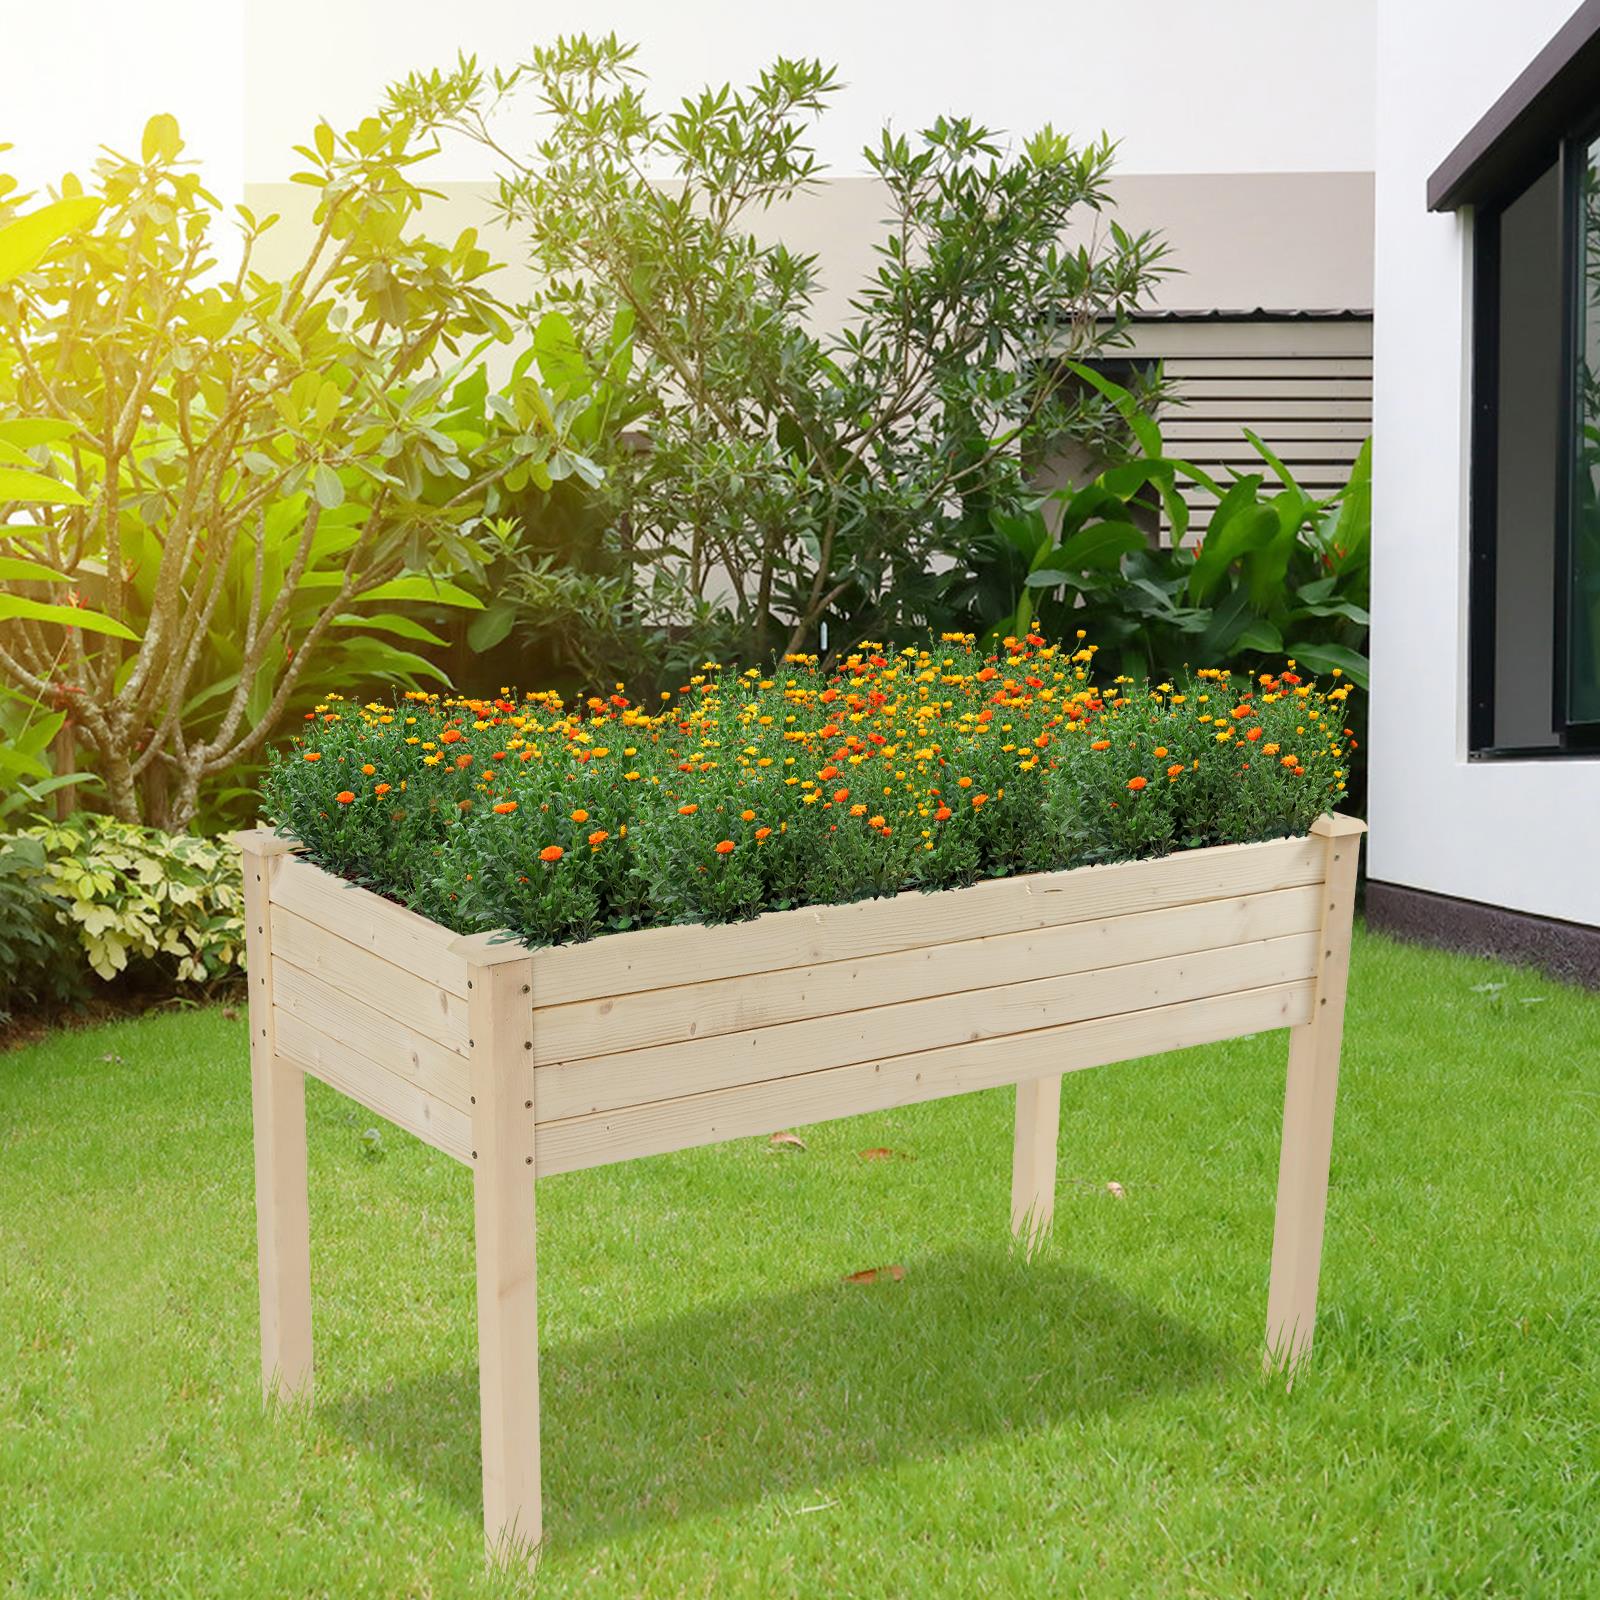 Zimtown 48.83 x 22.44 x 29.92" Outdoor Wooden Raised Garden Bed Planter Raised Bed for Vegetables, Grass, Lawn, Yard - Natural - image 2 of 13